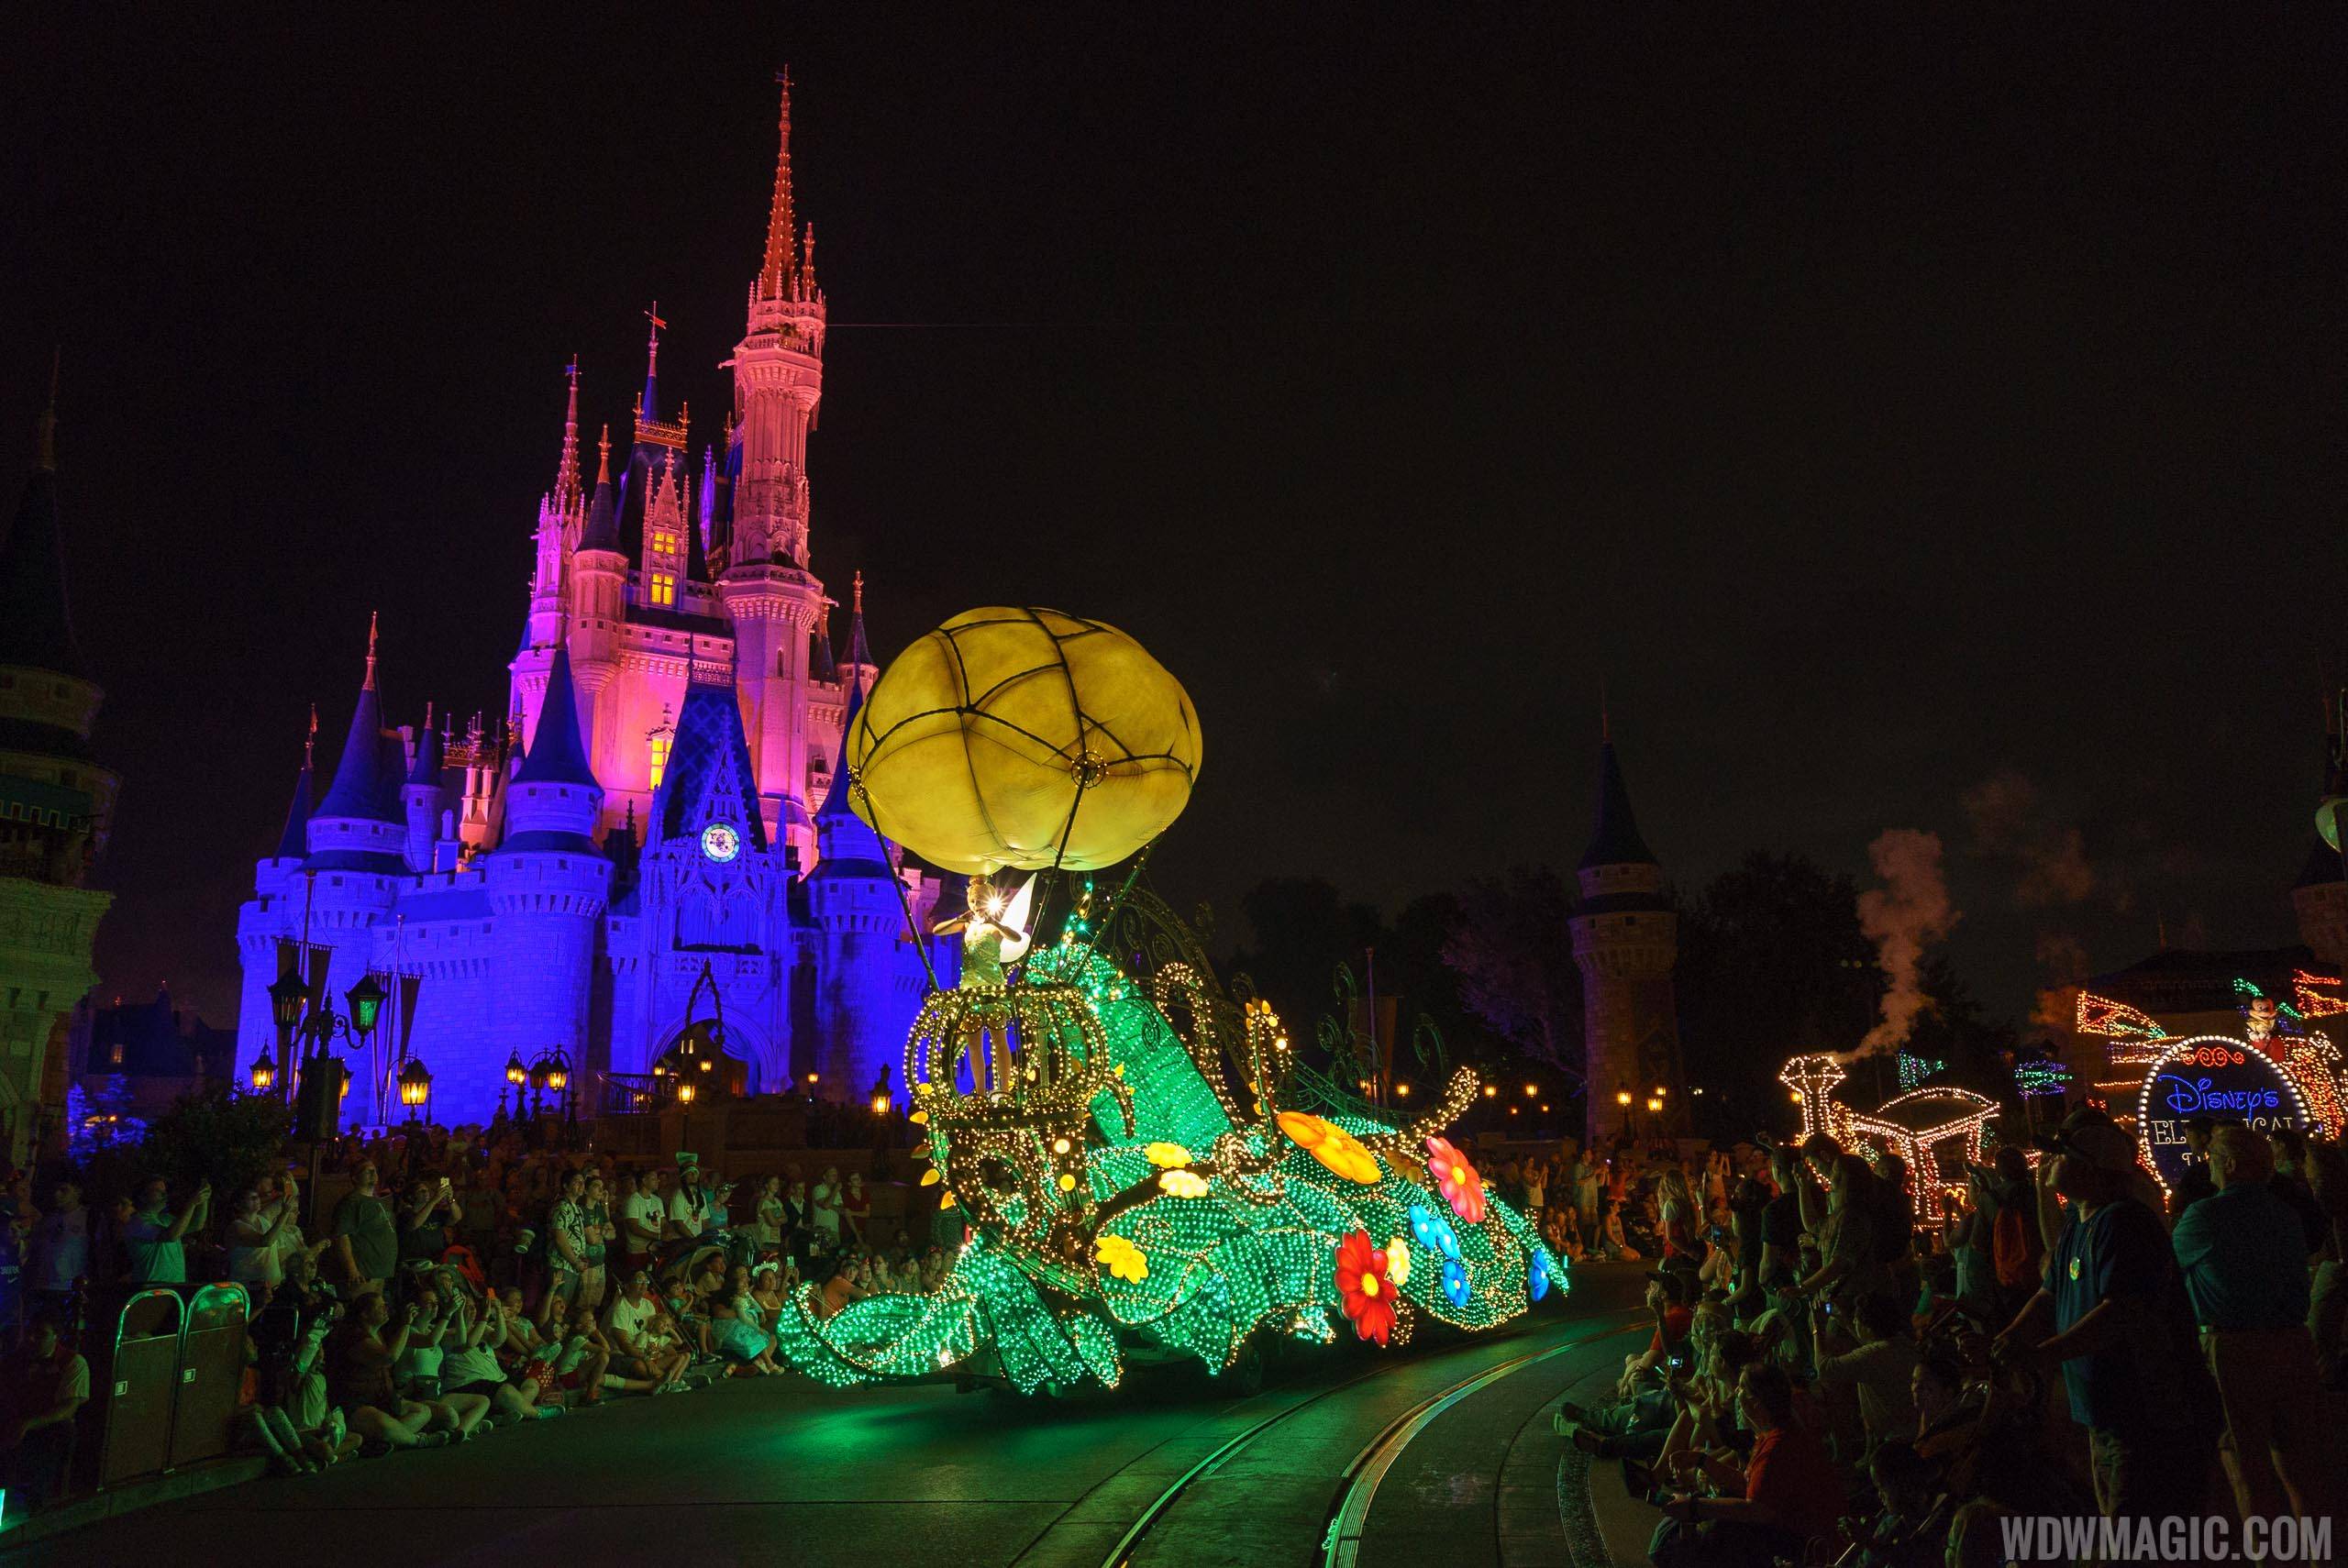 Main Street Electrical Parade confirmed to be leaving the Magic Kingdom